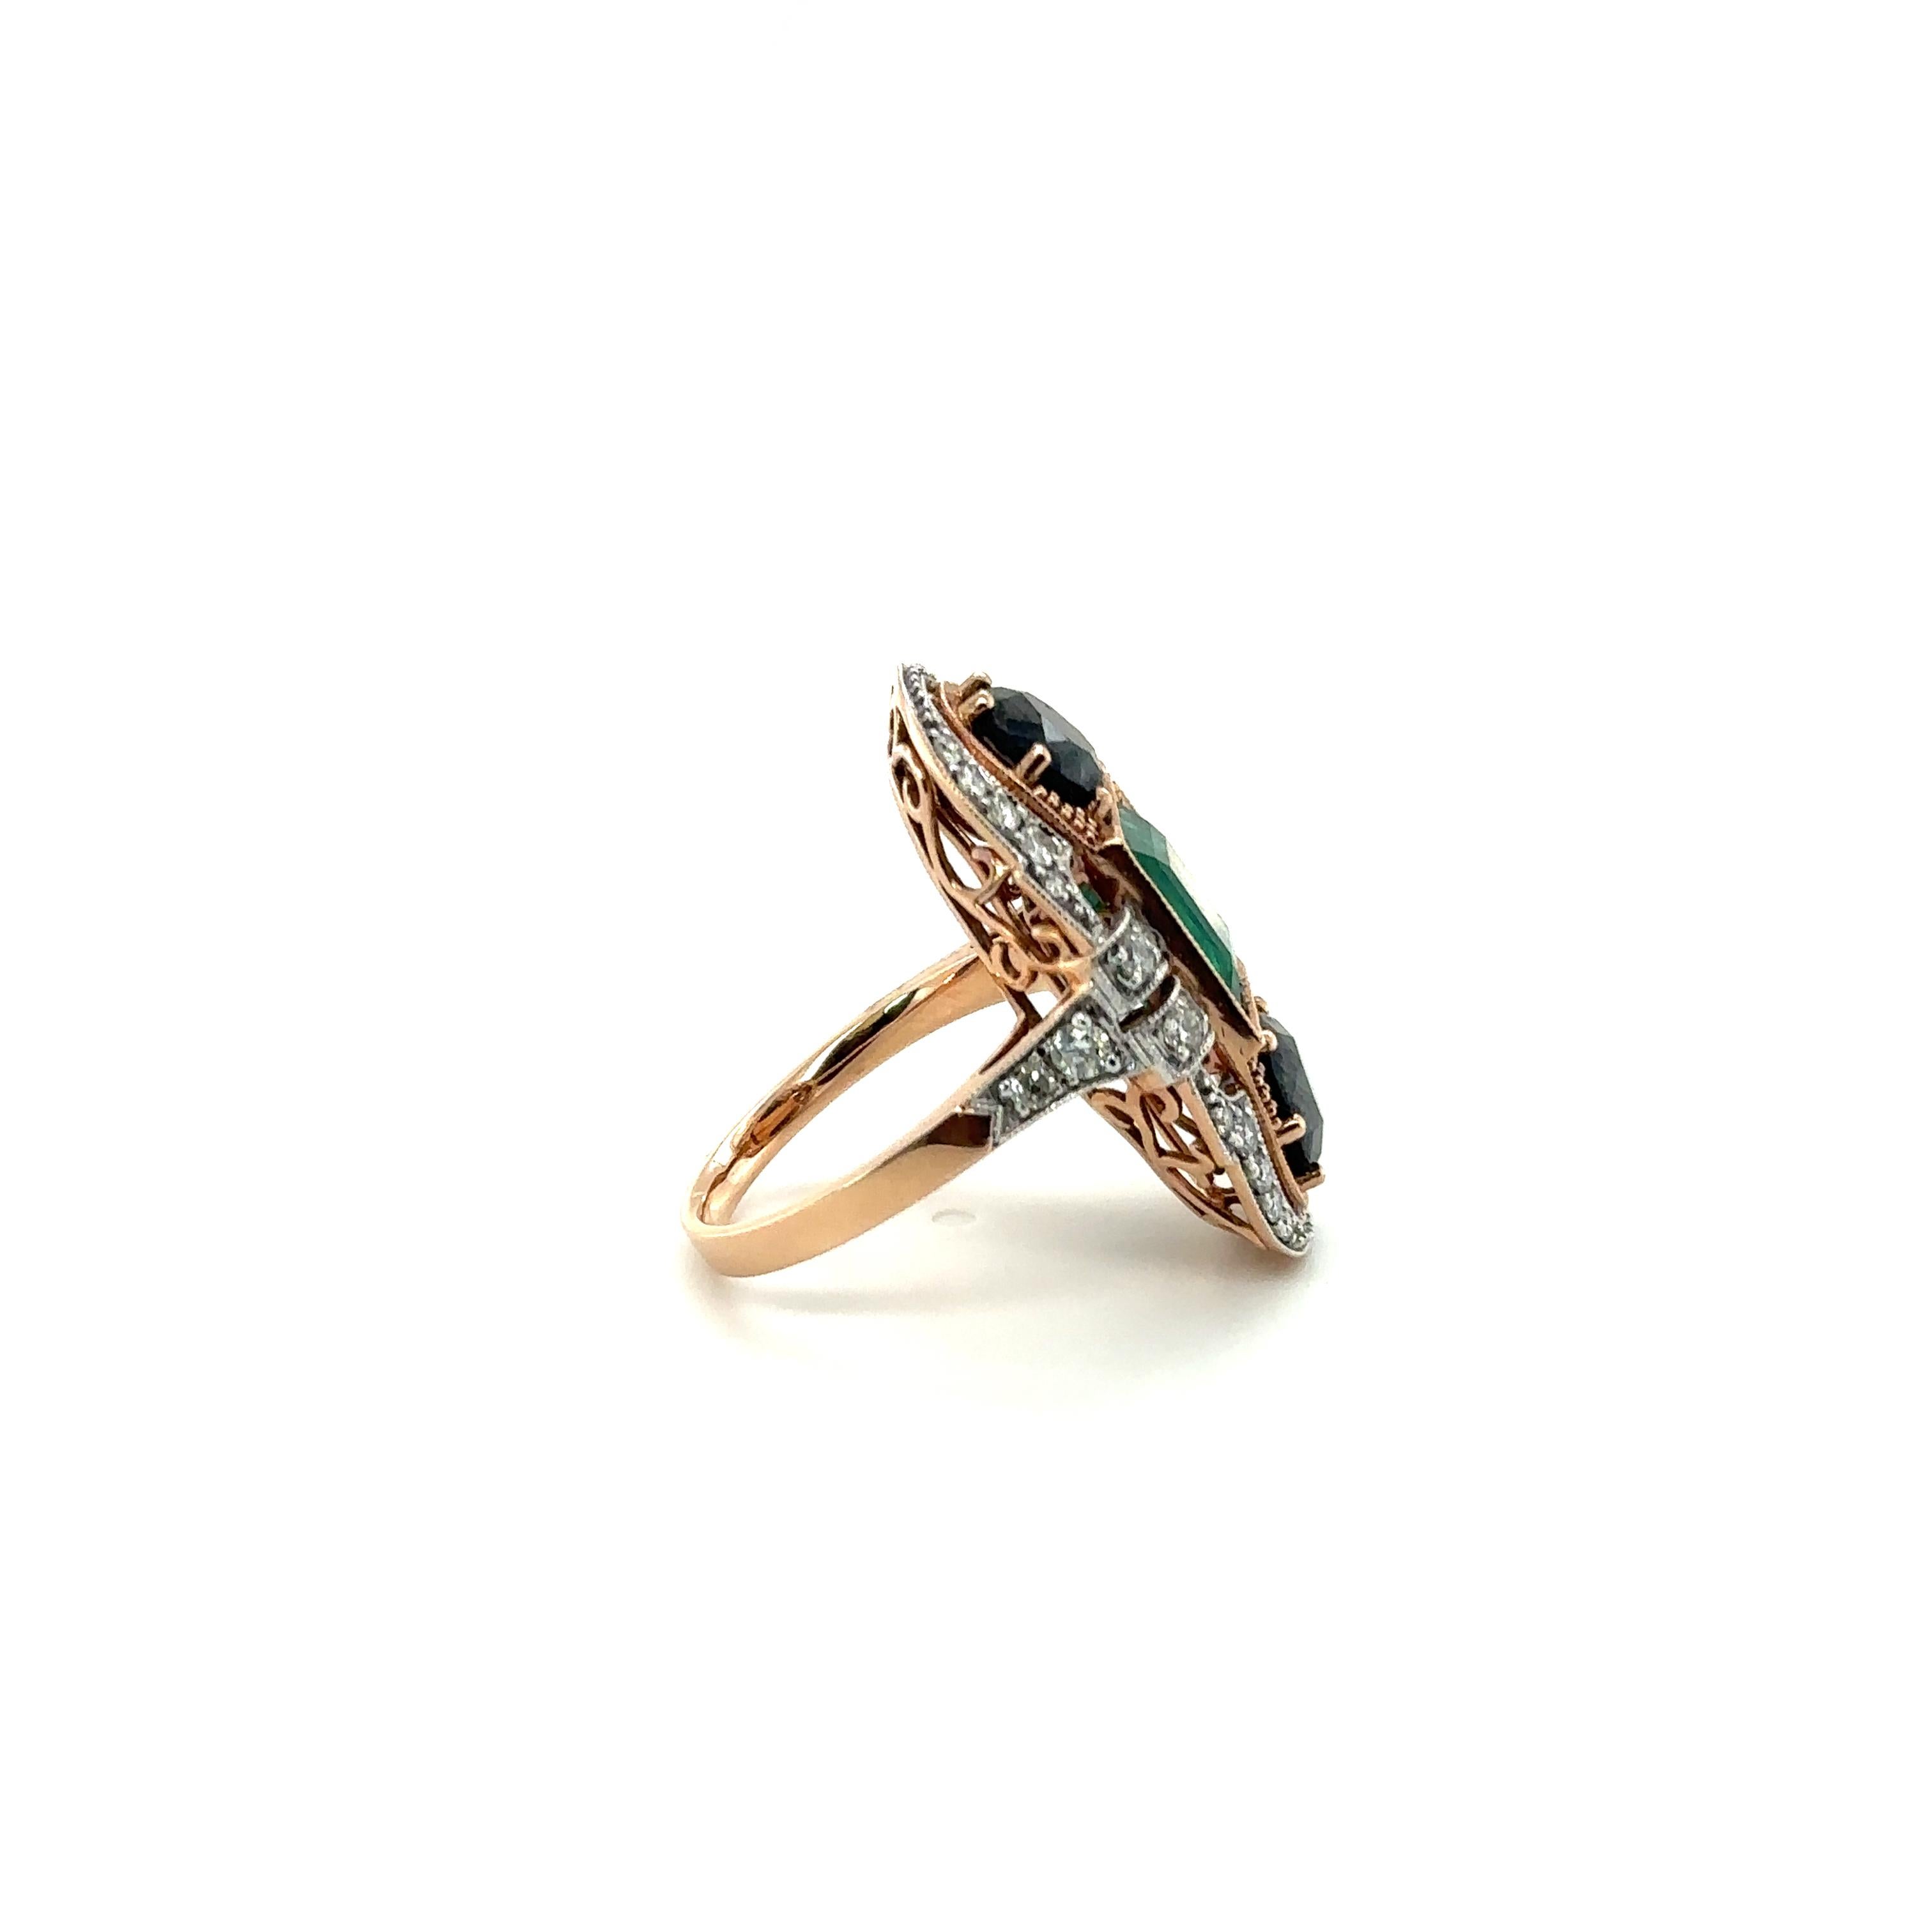 One ladies - art deco style 14ct rose gold dress ring, tapered shank with open back claw and rub over settings, polished finish. The item contains:

One rub over set emerald cut emerald, colour is 